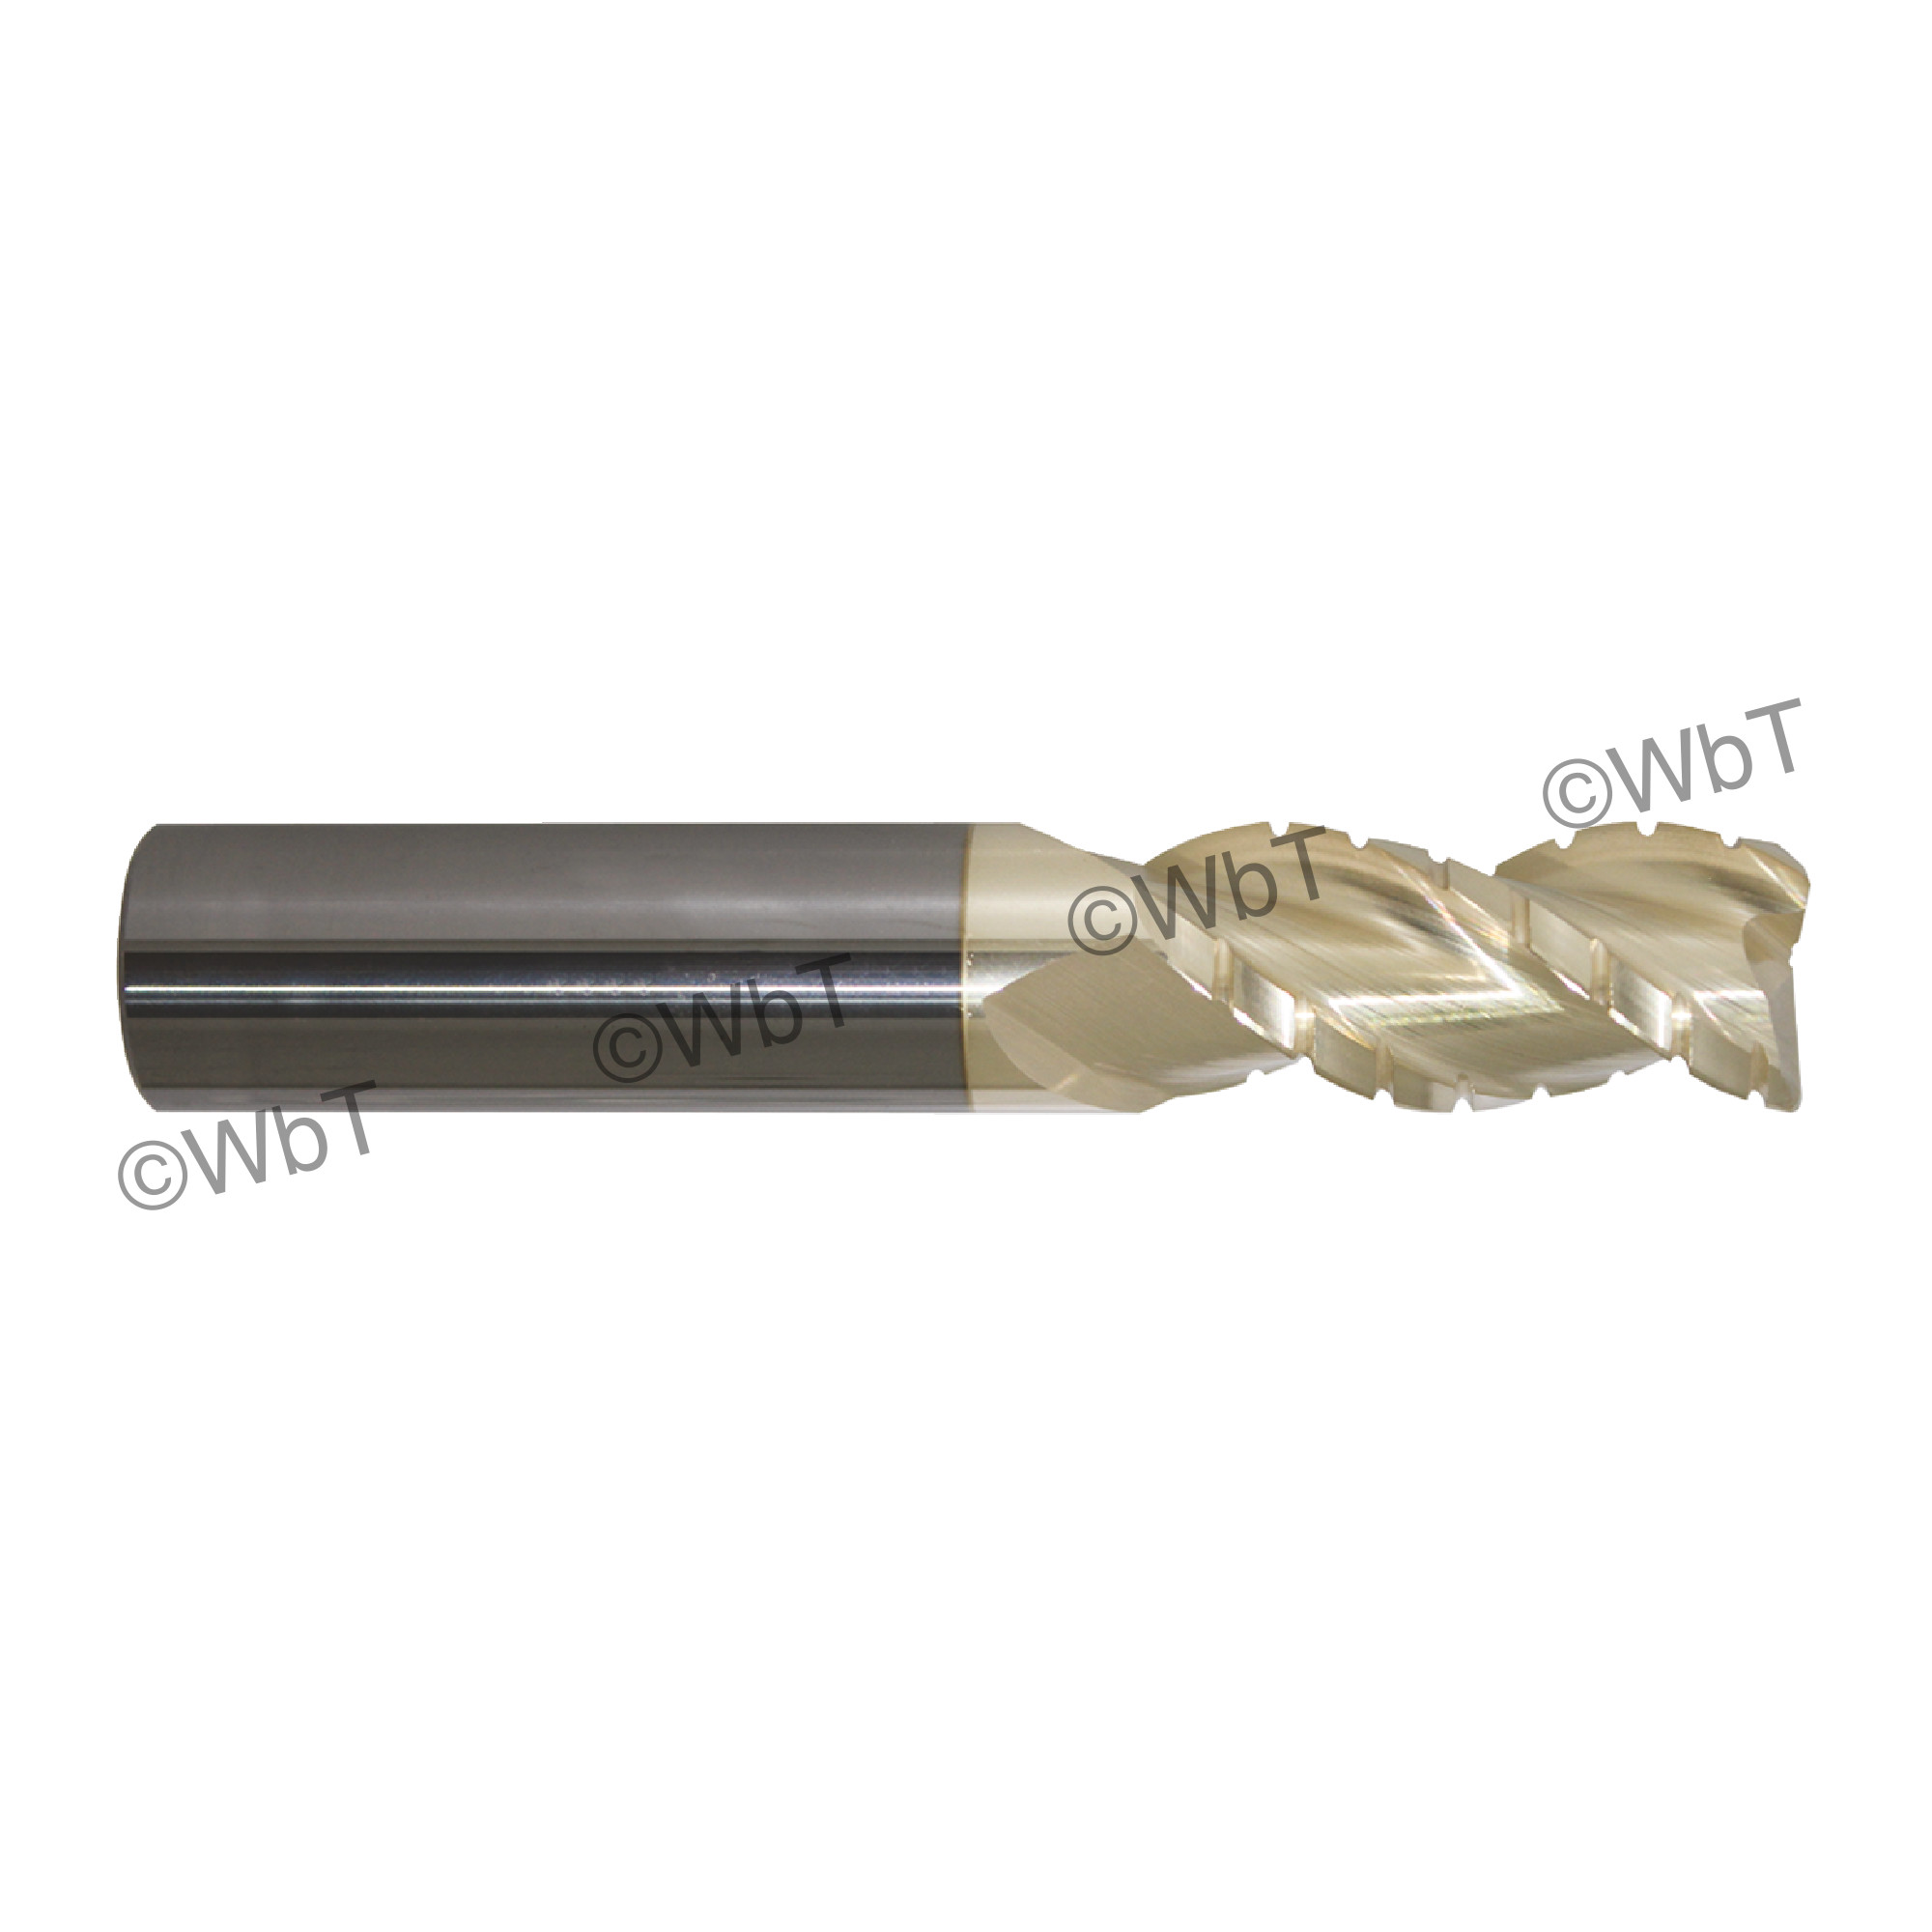 Promax Solid Carbide 3 Flute Roughing-Finishing Corner Radius End Mill 3/16" 119-01216 Series 119